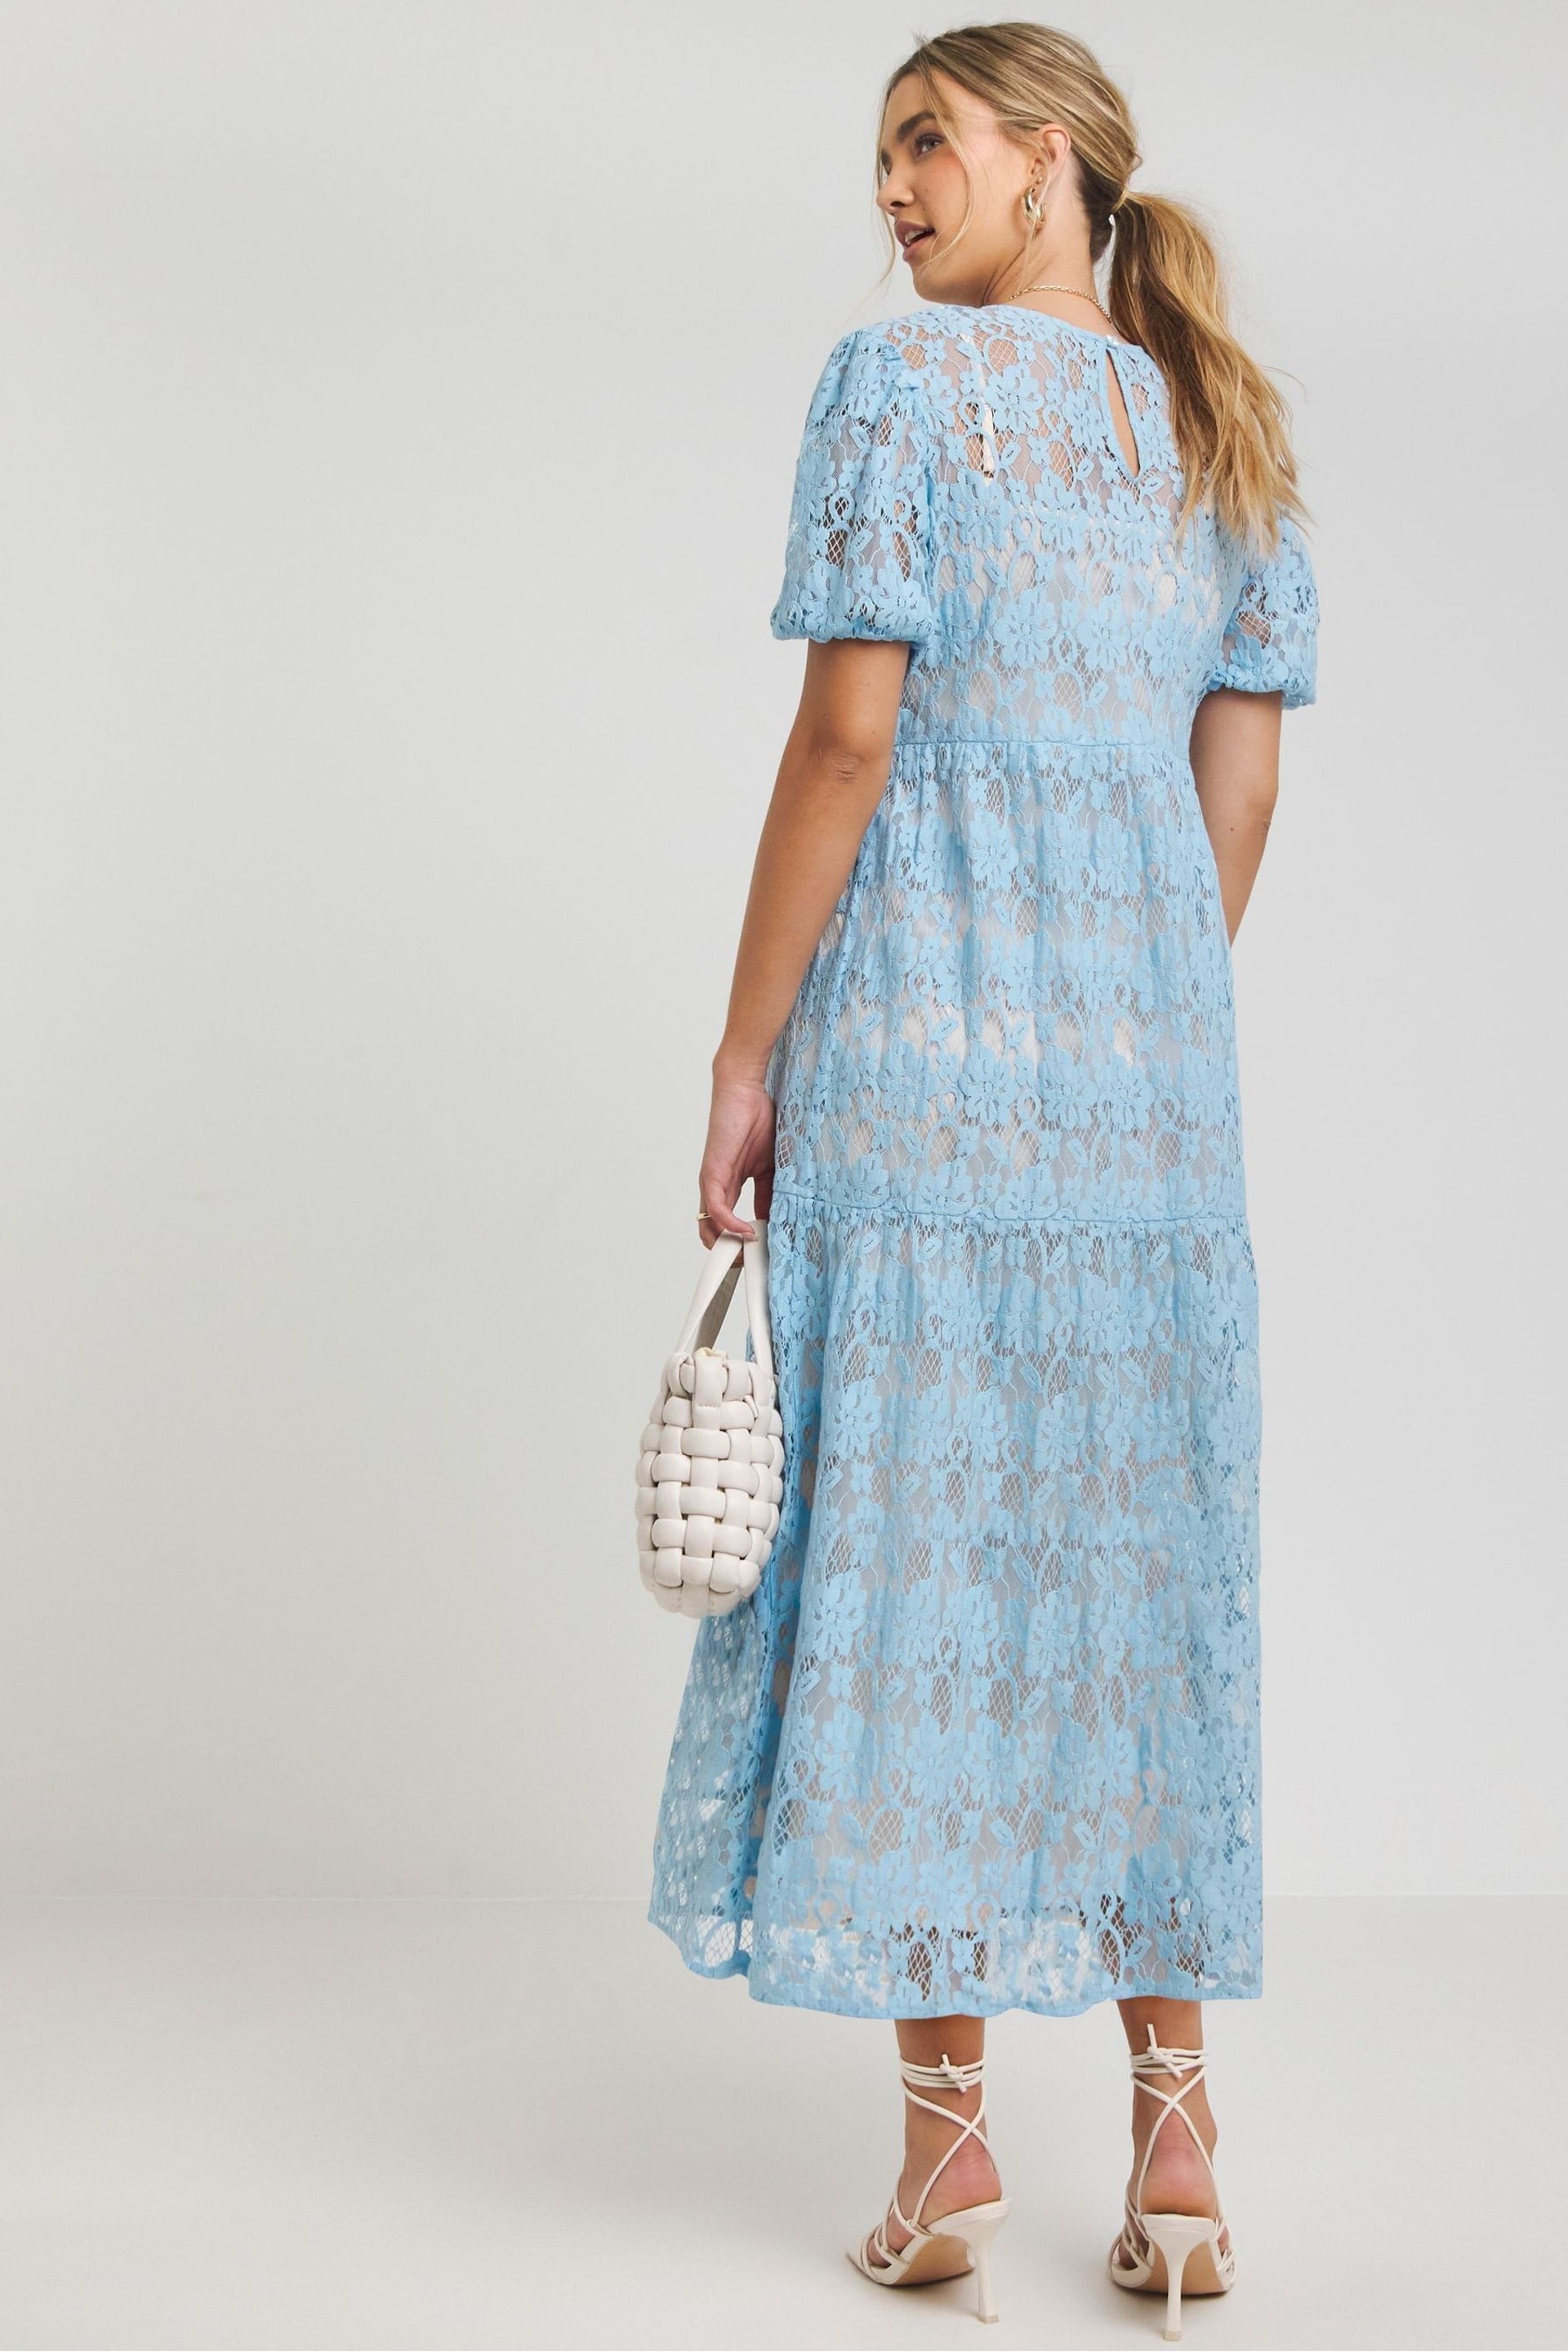 Simply Be Blue Lace Midi Dress - Image 2 of 4